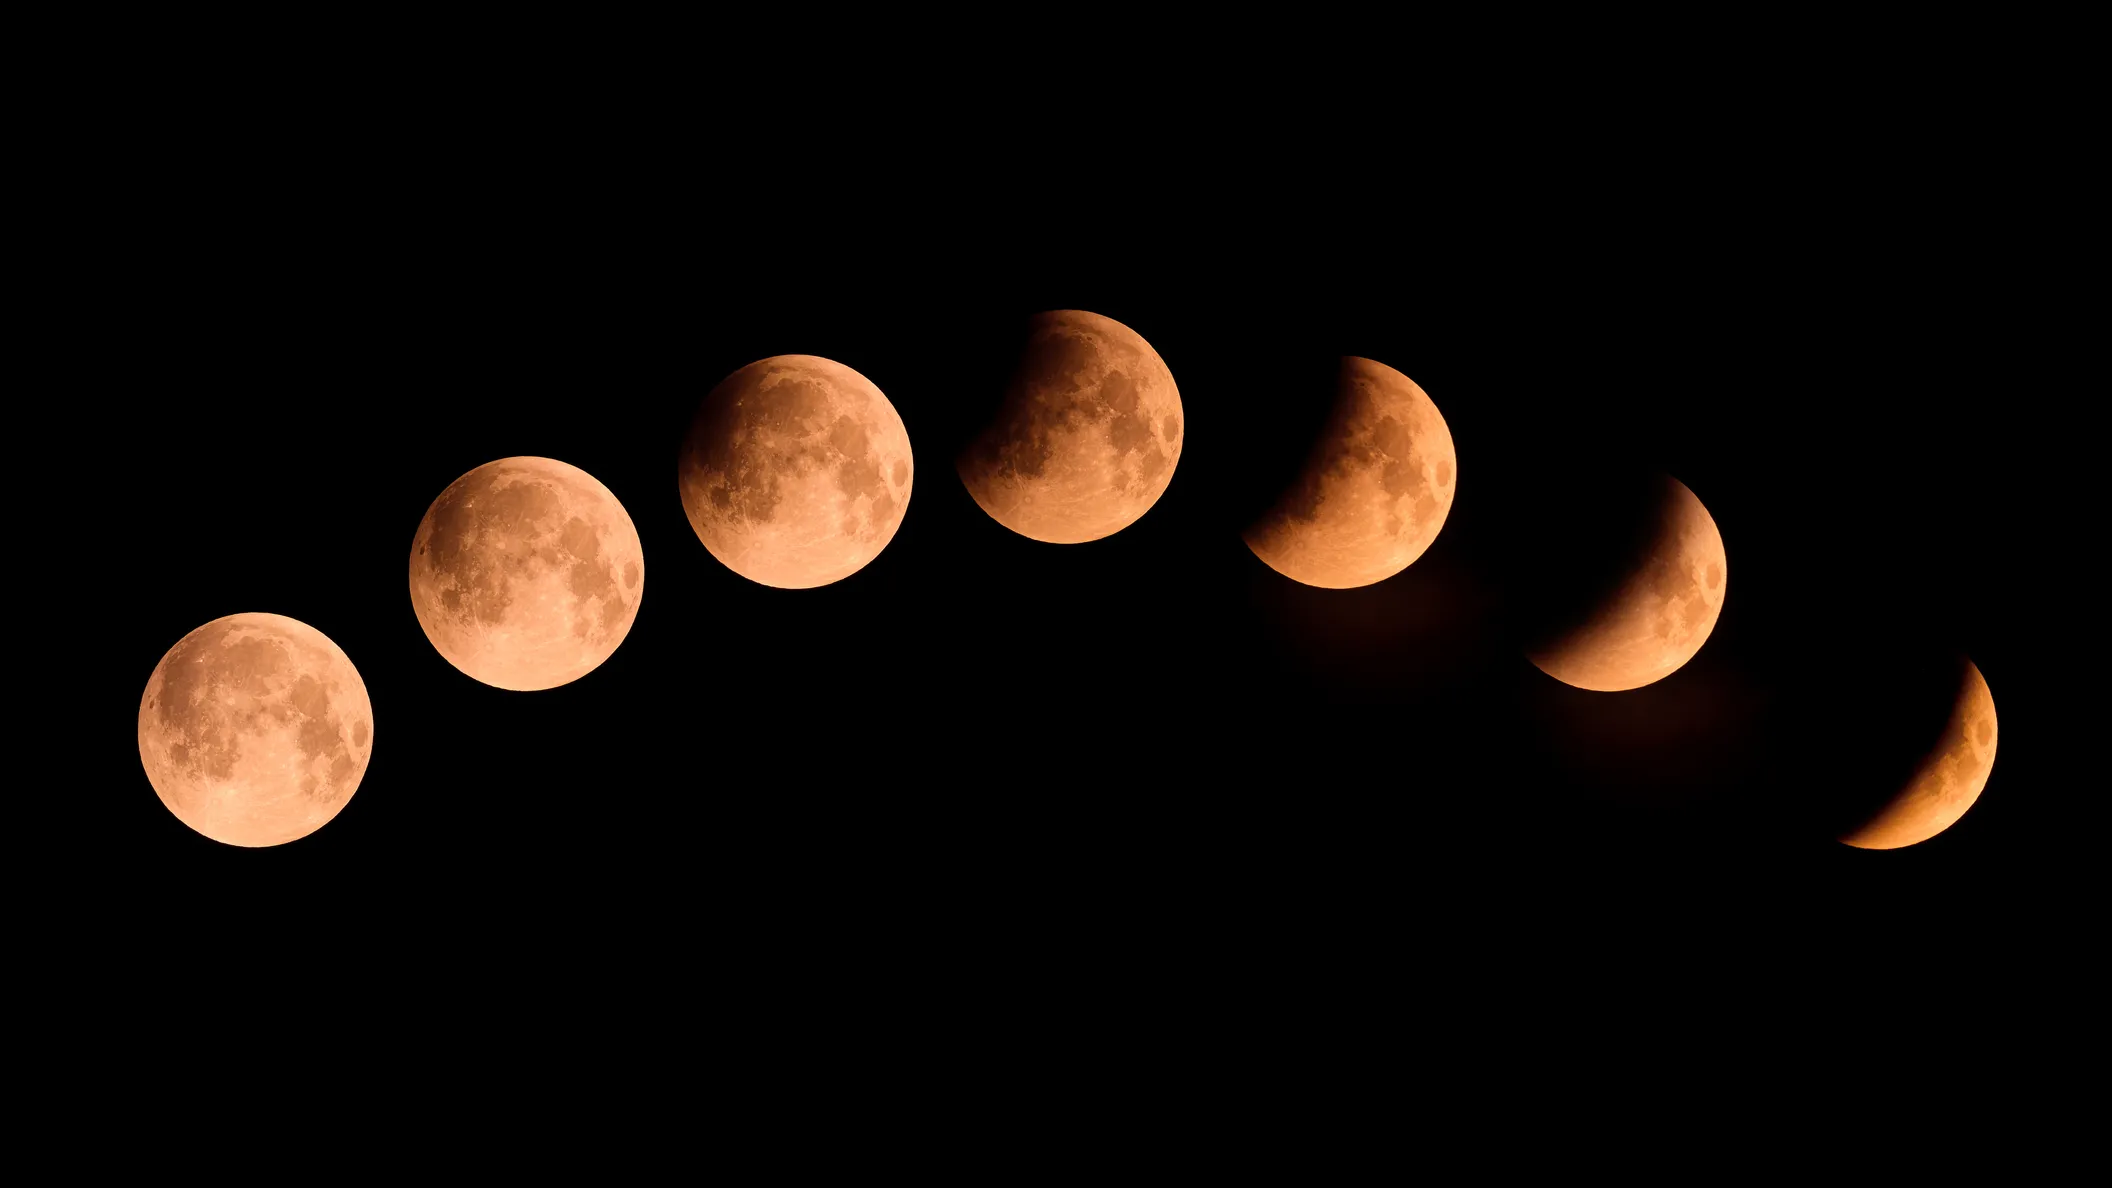 The 28 October Lunar Eclipse is Coming! Here’s How to See It